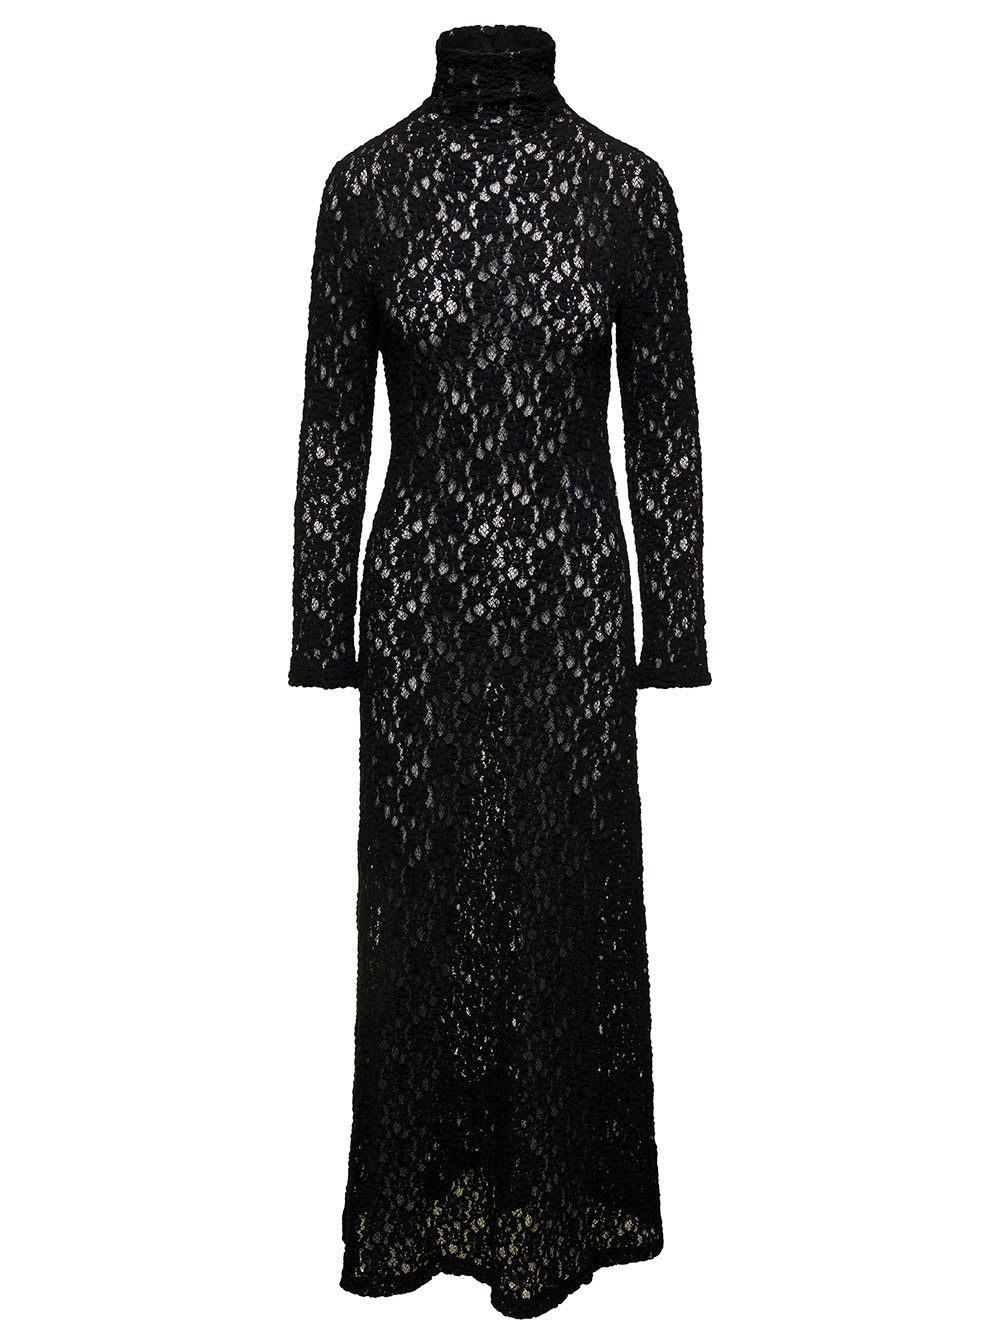 CHLOÉ LONG BLACK DRESS WITH HIGH-NECK IN LACE WOMAN